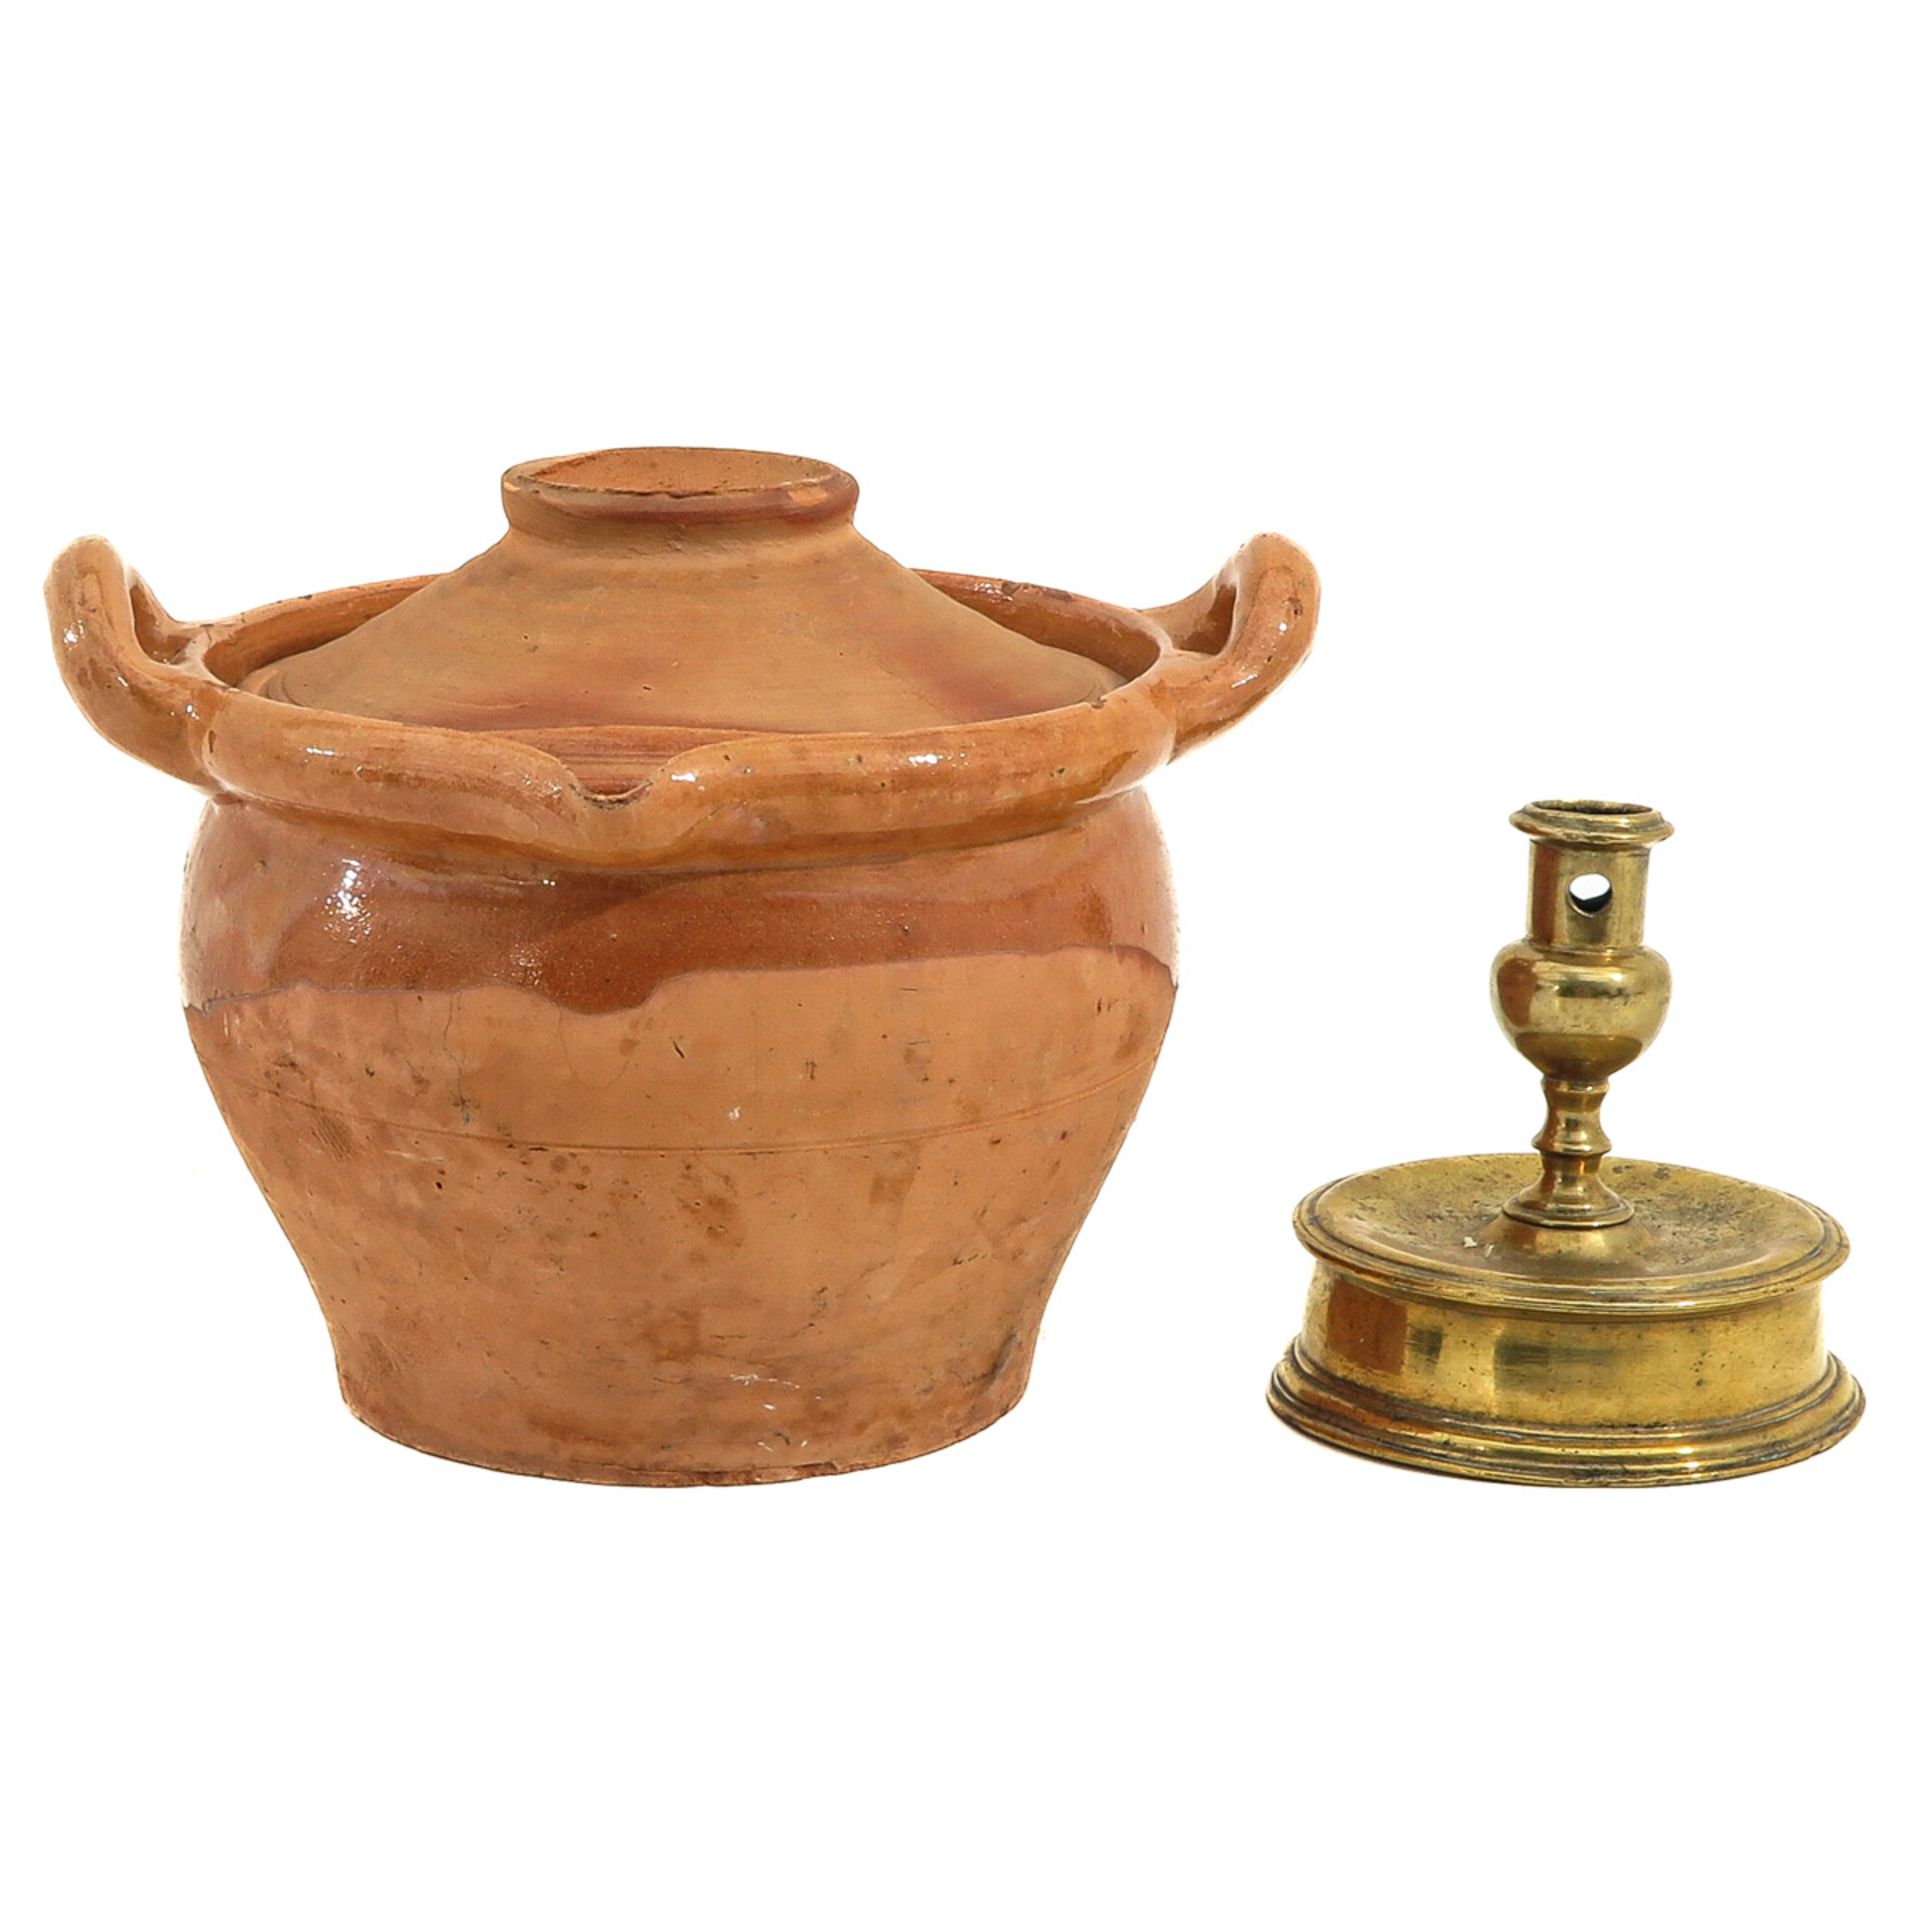 A Candlestick and Pot